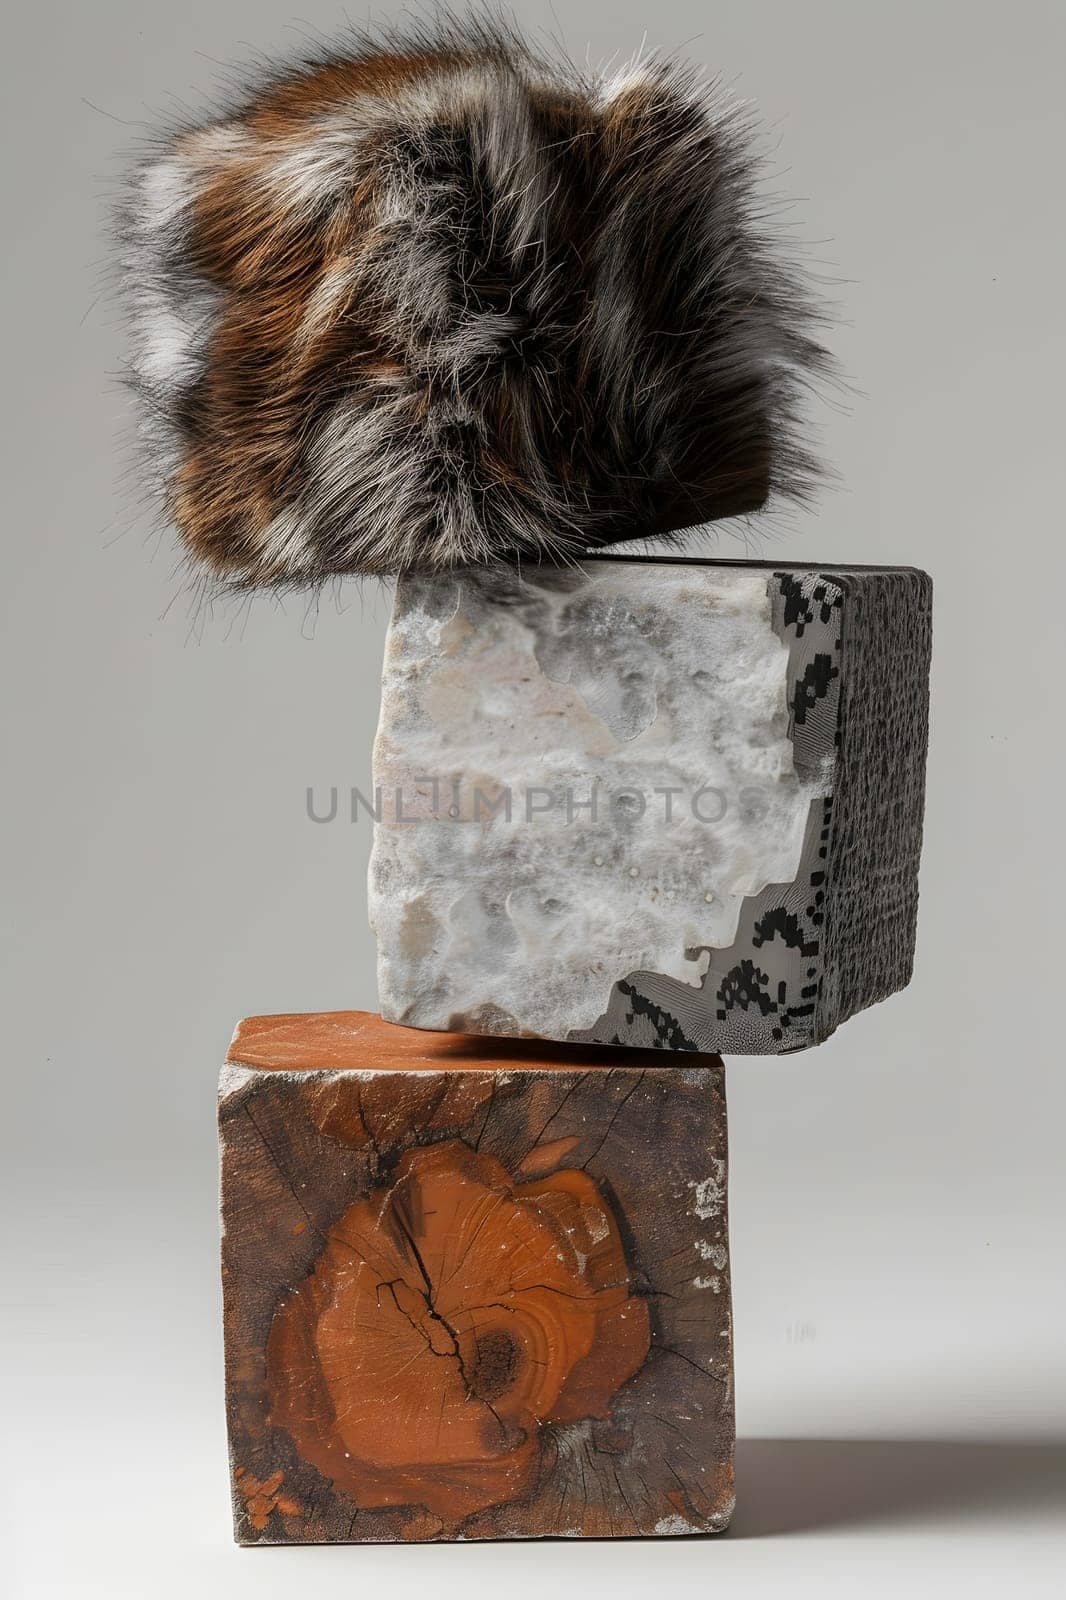 a furry hat is sitting on top of a stack of blocks by Nadtochiy